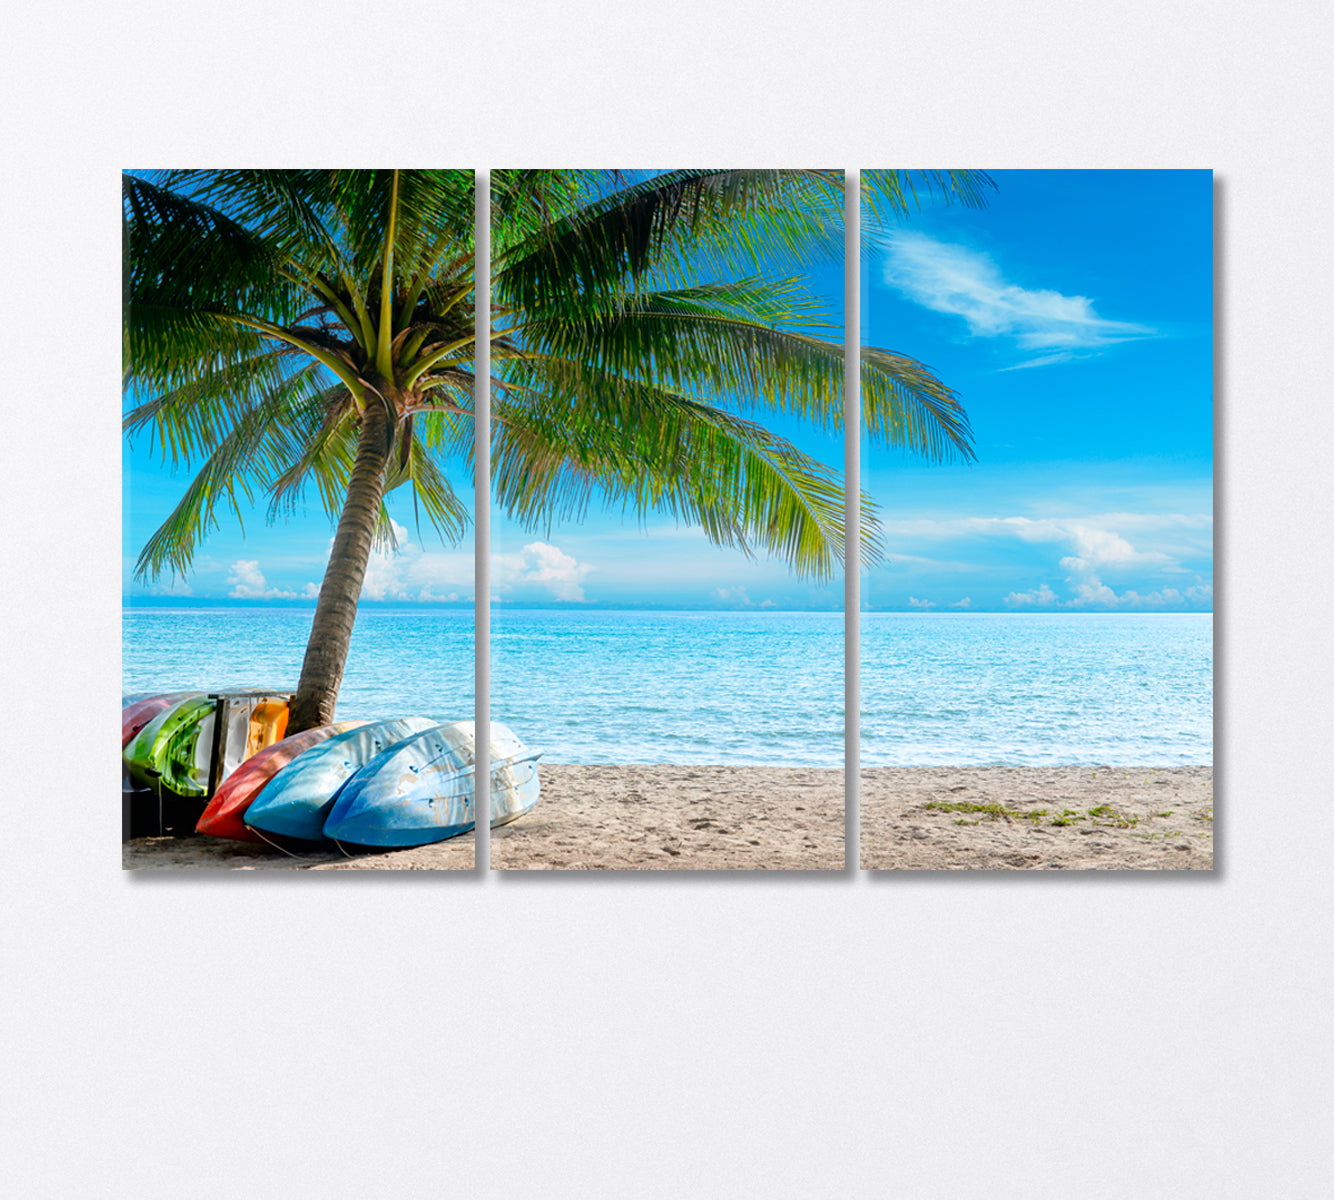 Kayak on Sunny Tropical Beach with Palm Trees Canvas Print-Canvas Print-CetArt-3 Panels-36x24 inches-CetArt